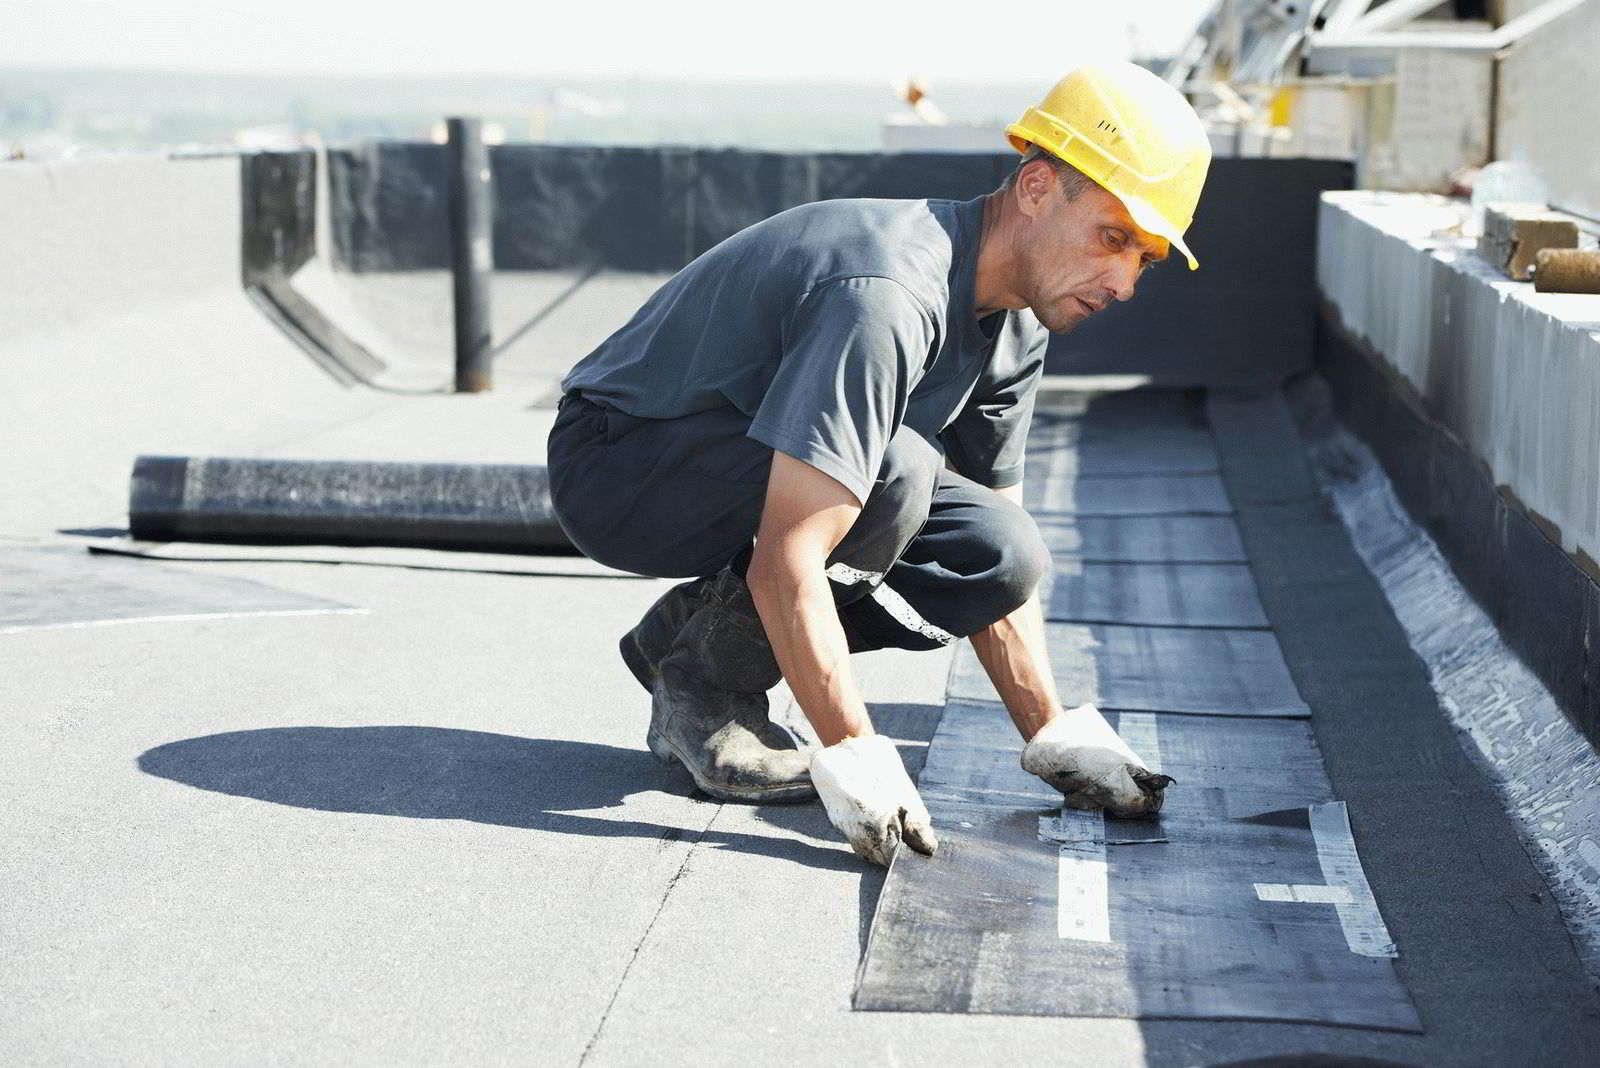 Ranking of the best flat roof materials in 2020